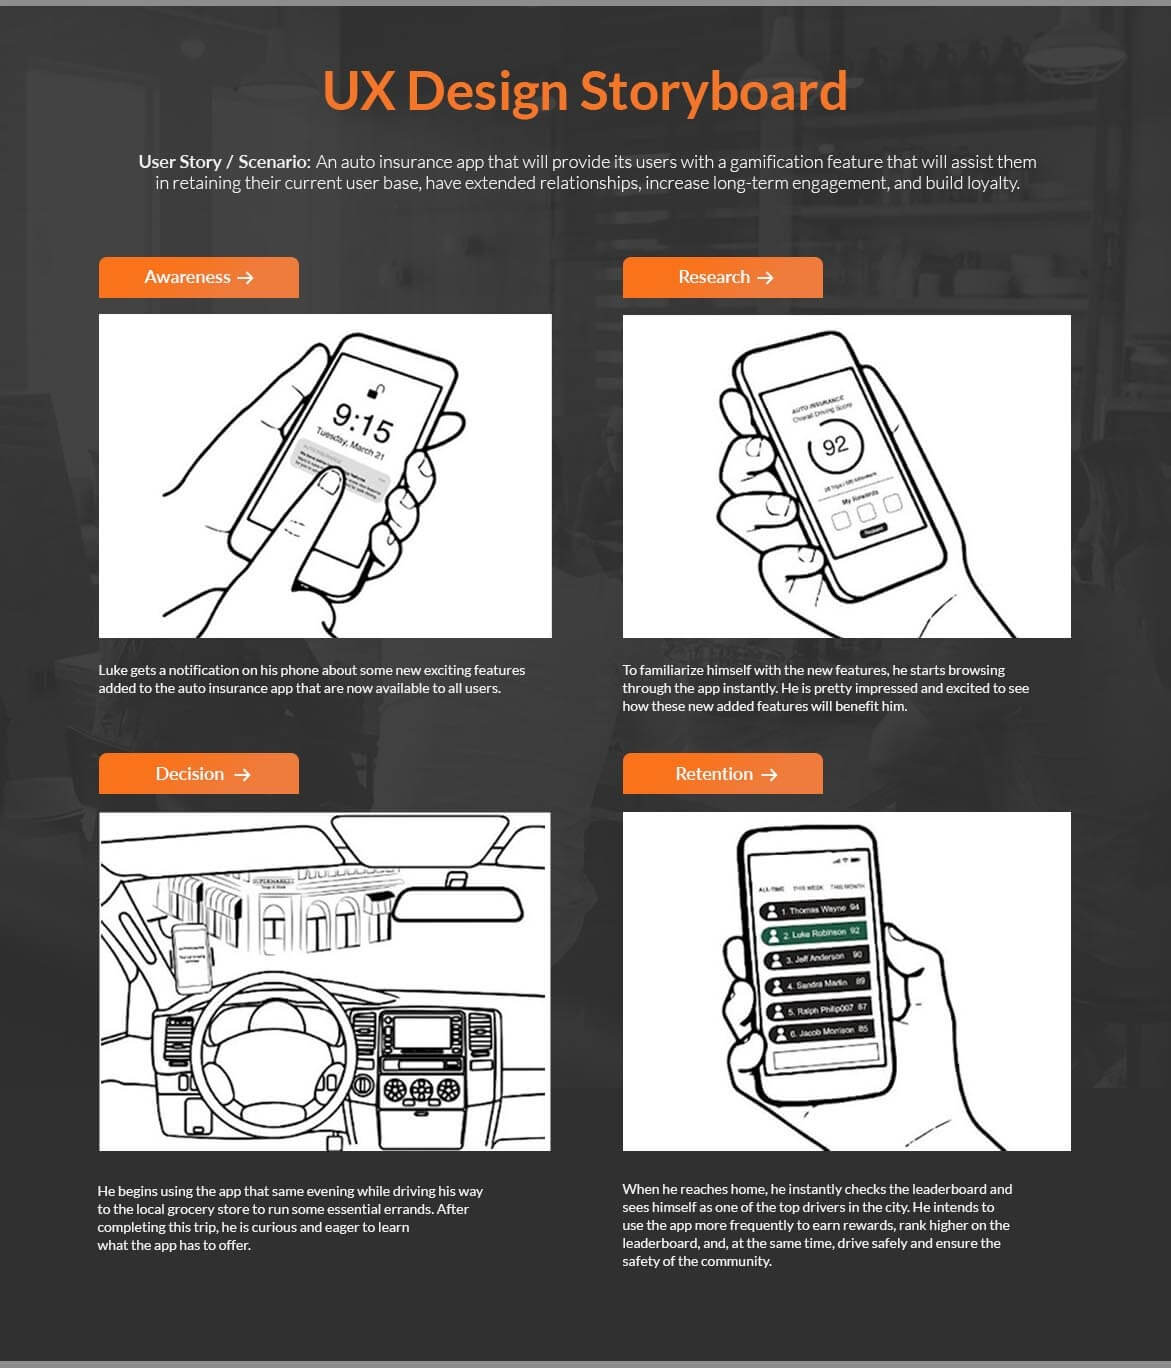 UX Design Storyboard showing the user story for an auto insurance app in 4 scenes